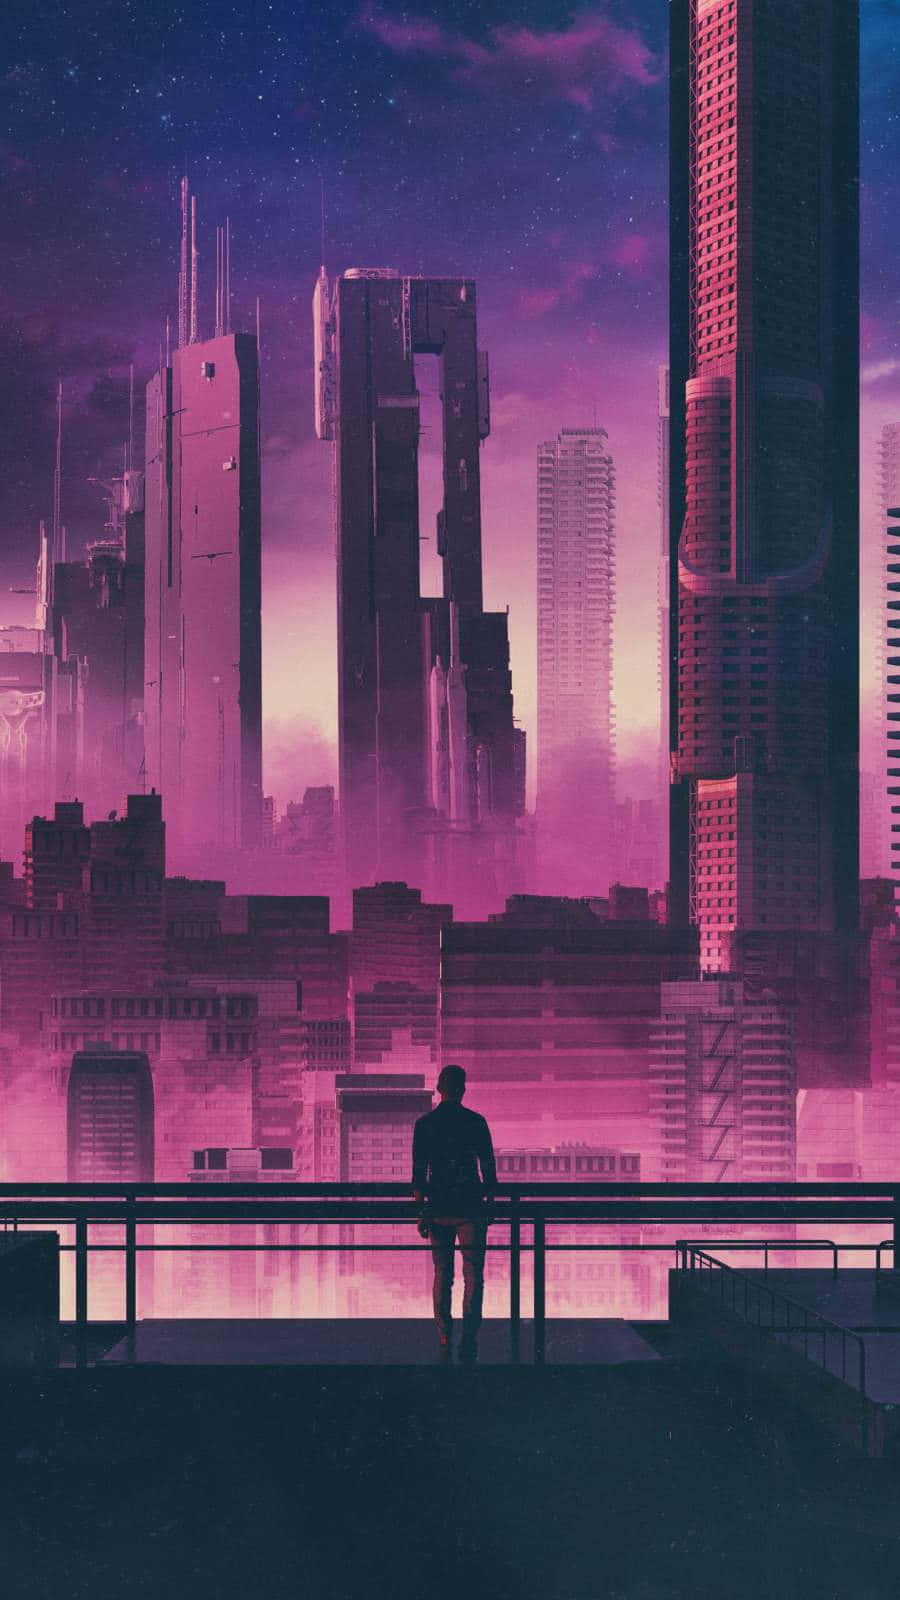 A view of a vibrant, high-tech future city filled with skyscrapers and LED billboards. Wallpaper